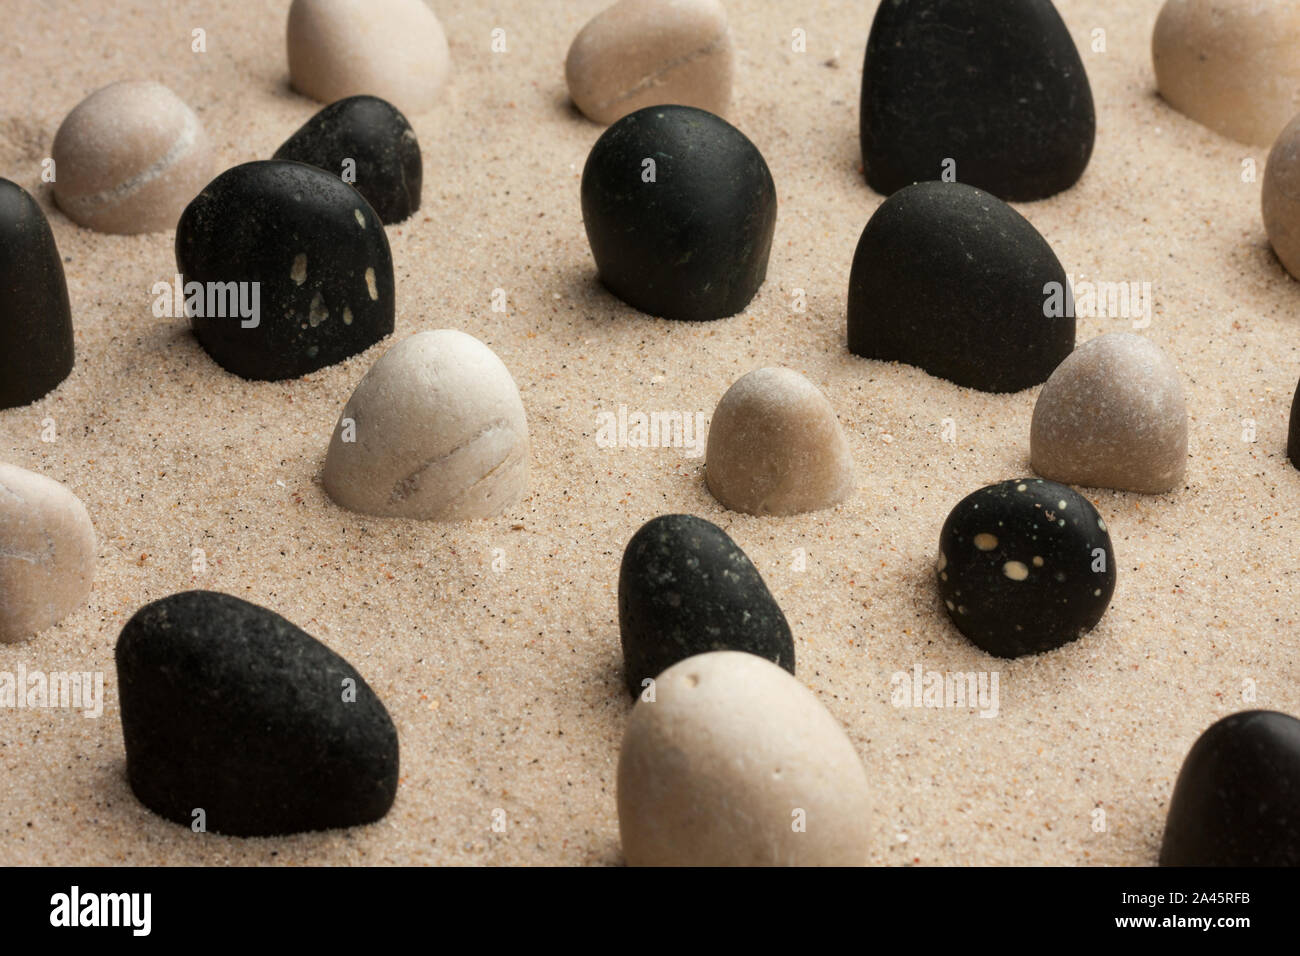 Rock garden. Stones sticking out of the sand in the sunlight. Spa background Stock Photo